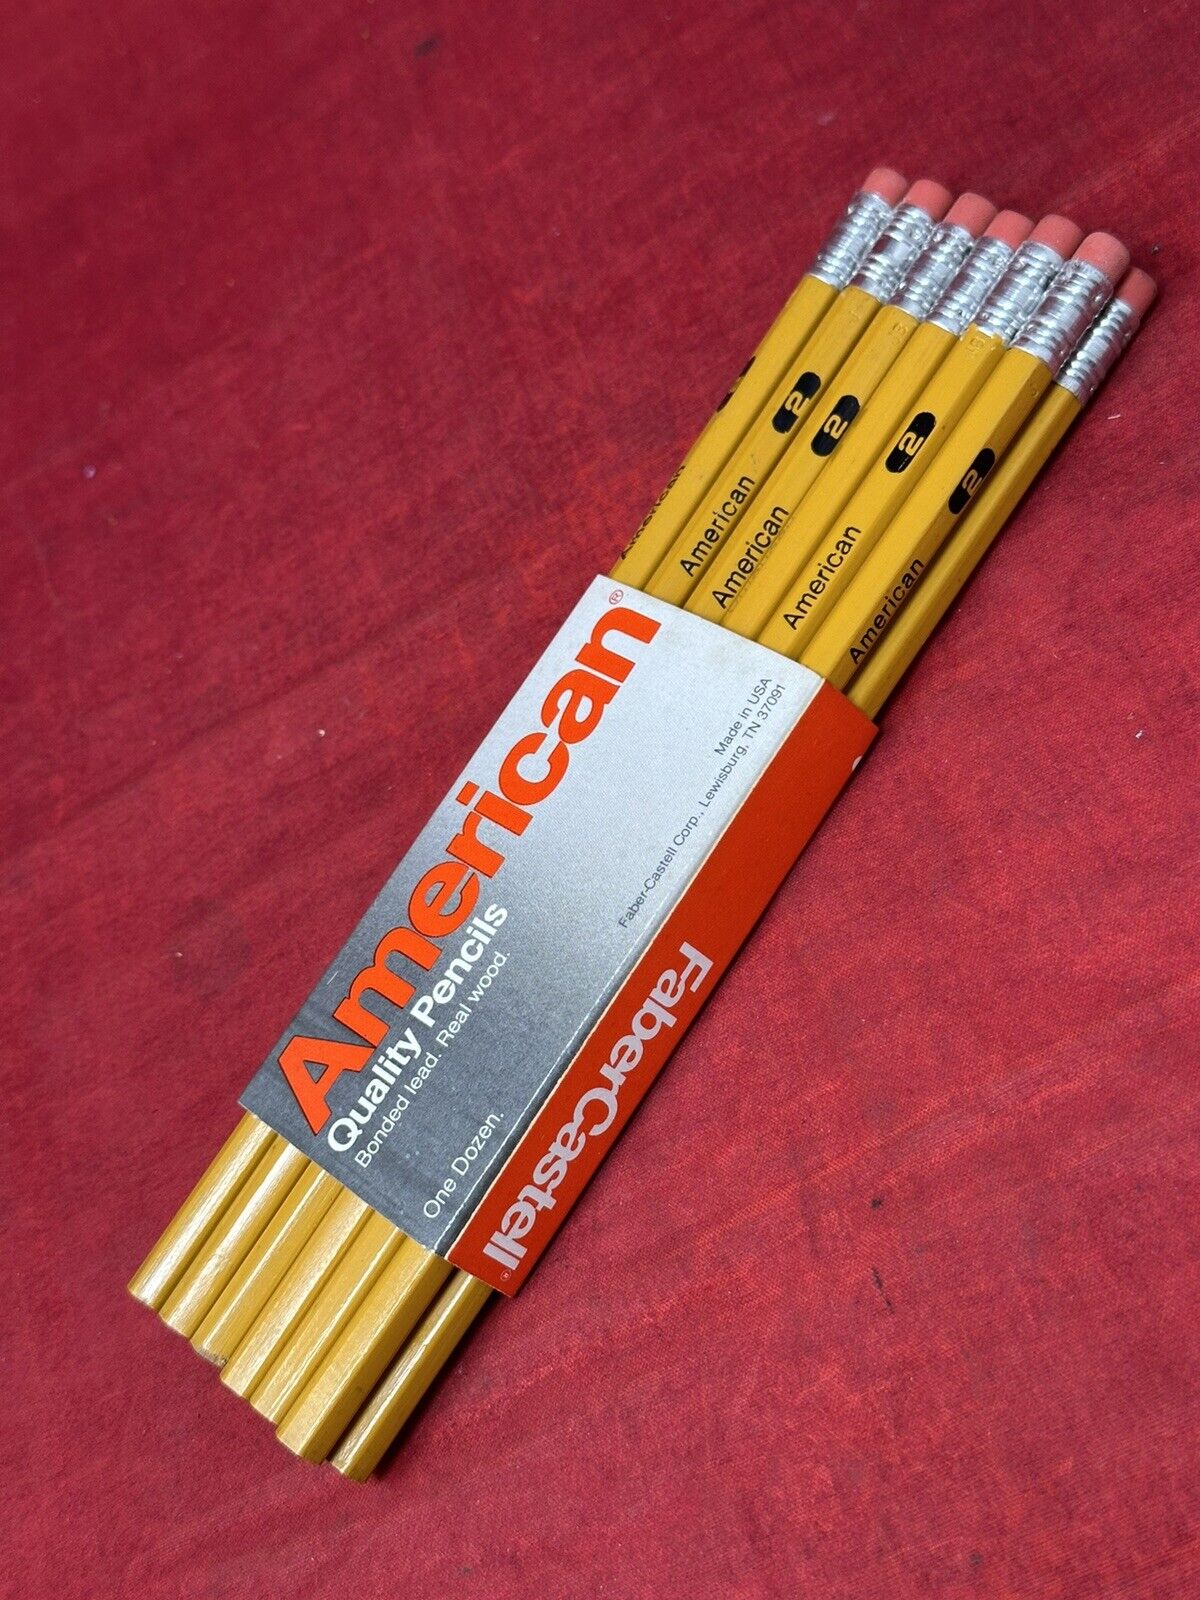 12 NOS Faber Castell American Wood Pencil No 2 Bonded Lead Made in USA NEW VTG